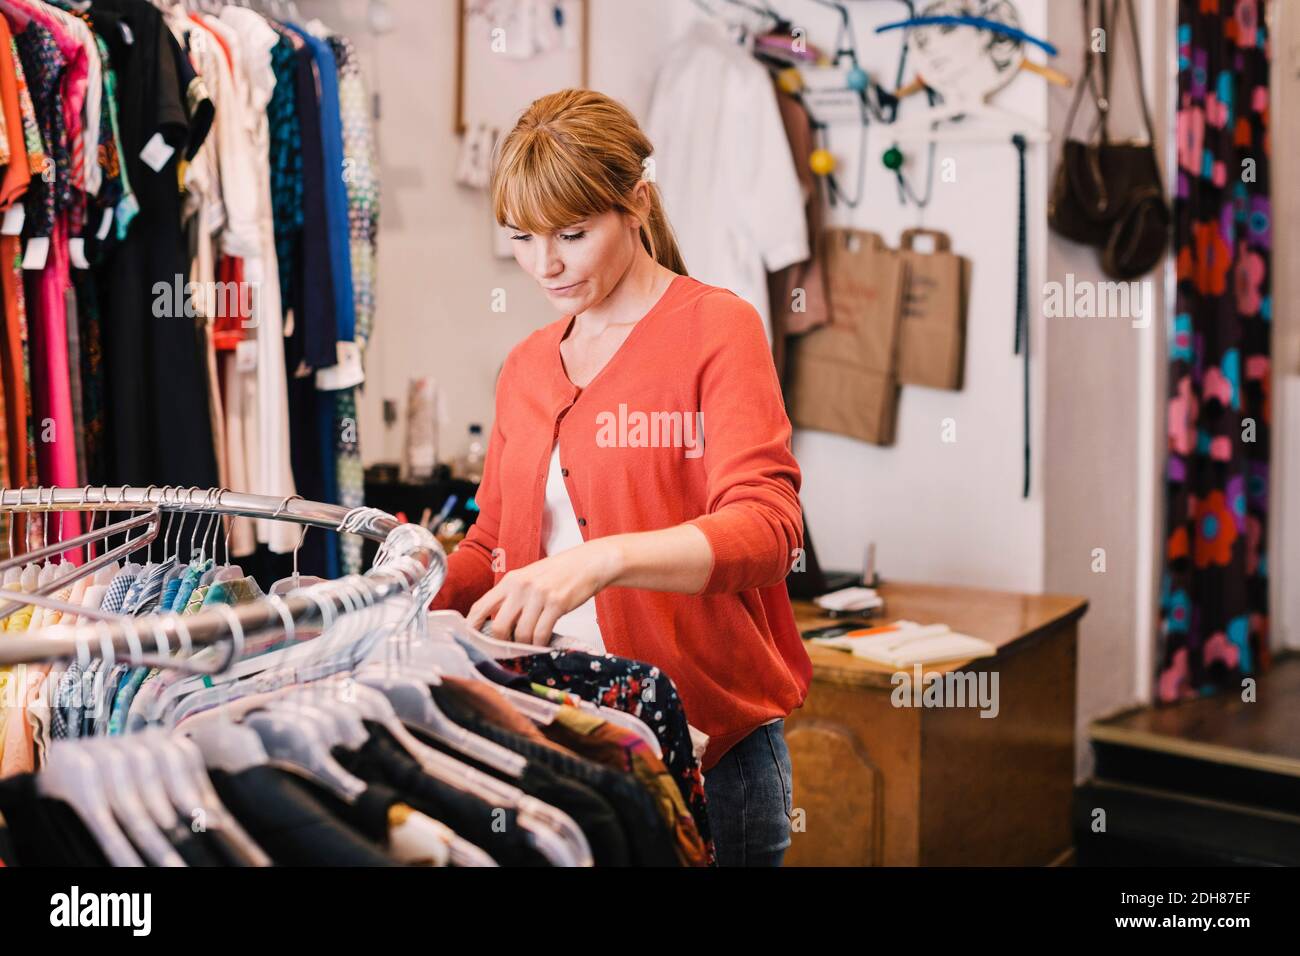 Owner arranging clothes on rack while standing at thrift store Stock Photo